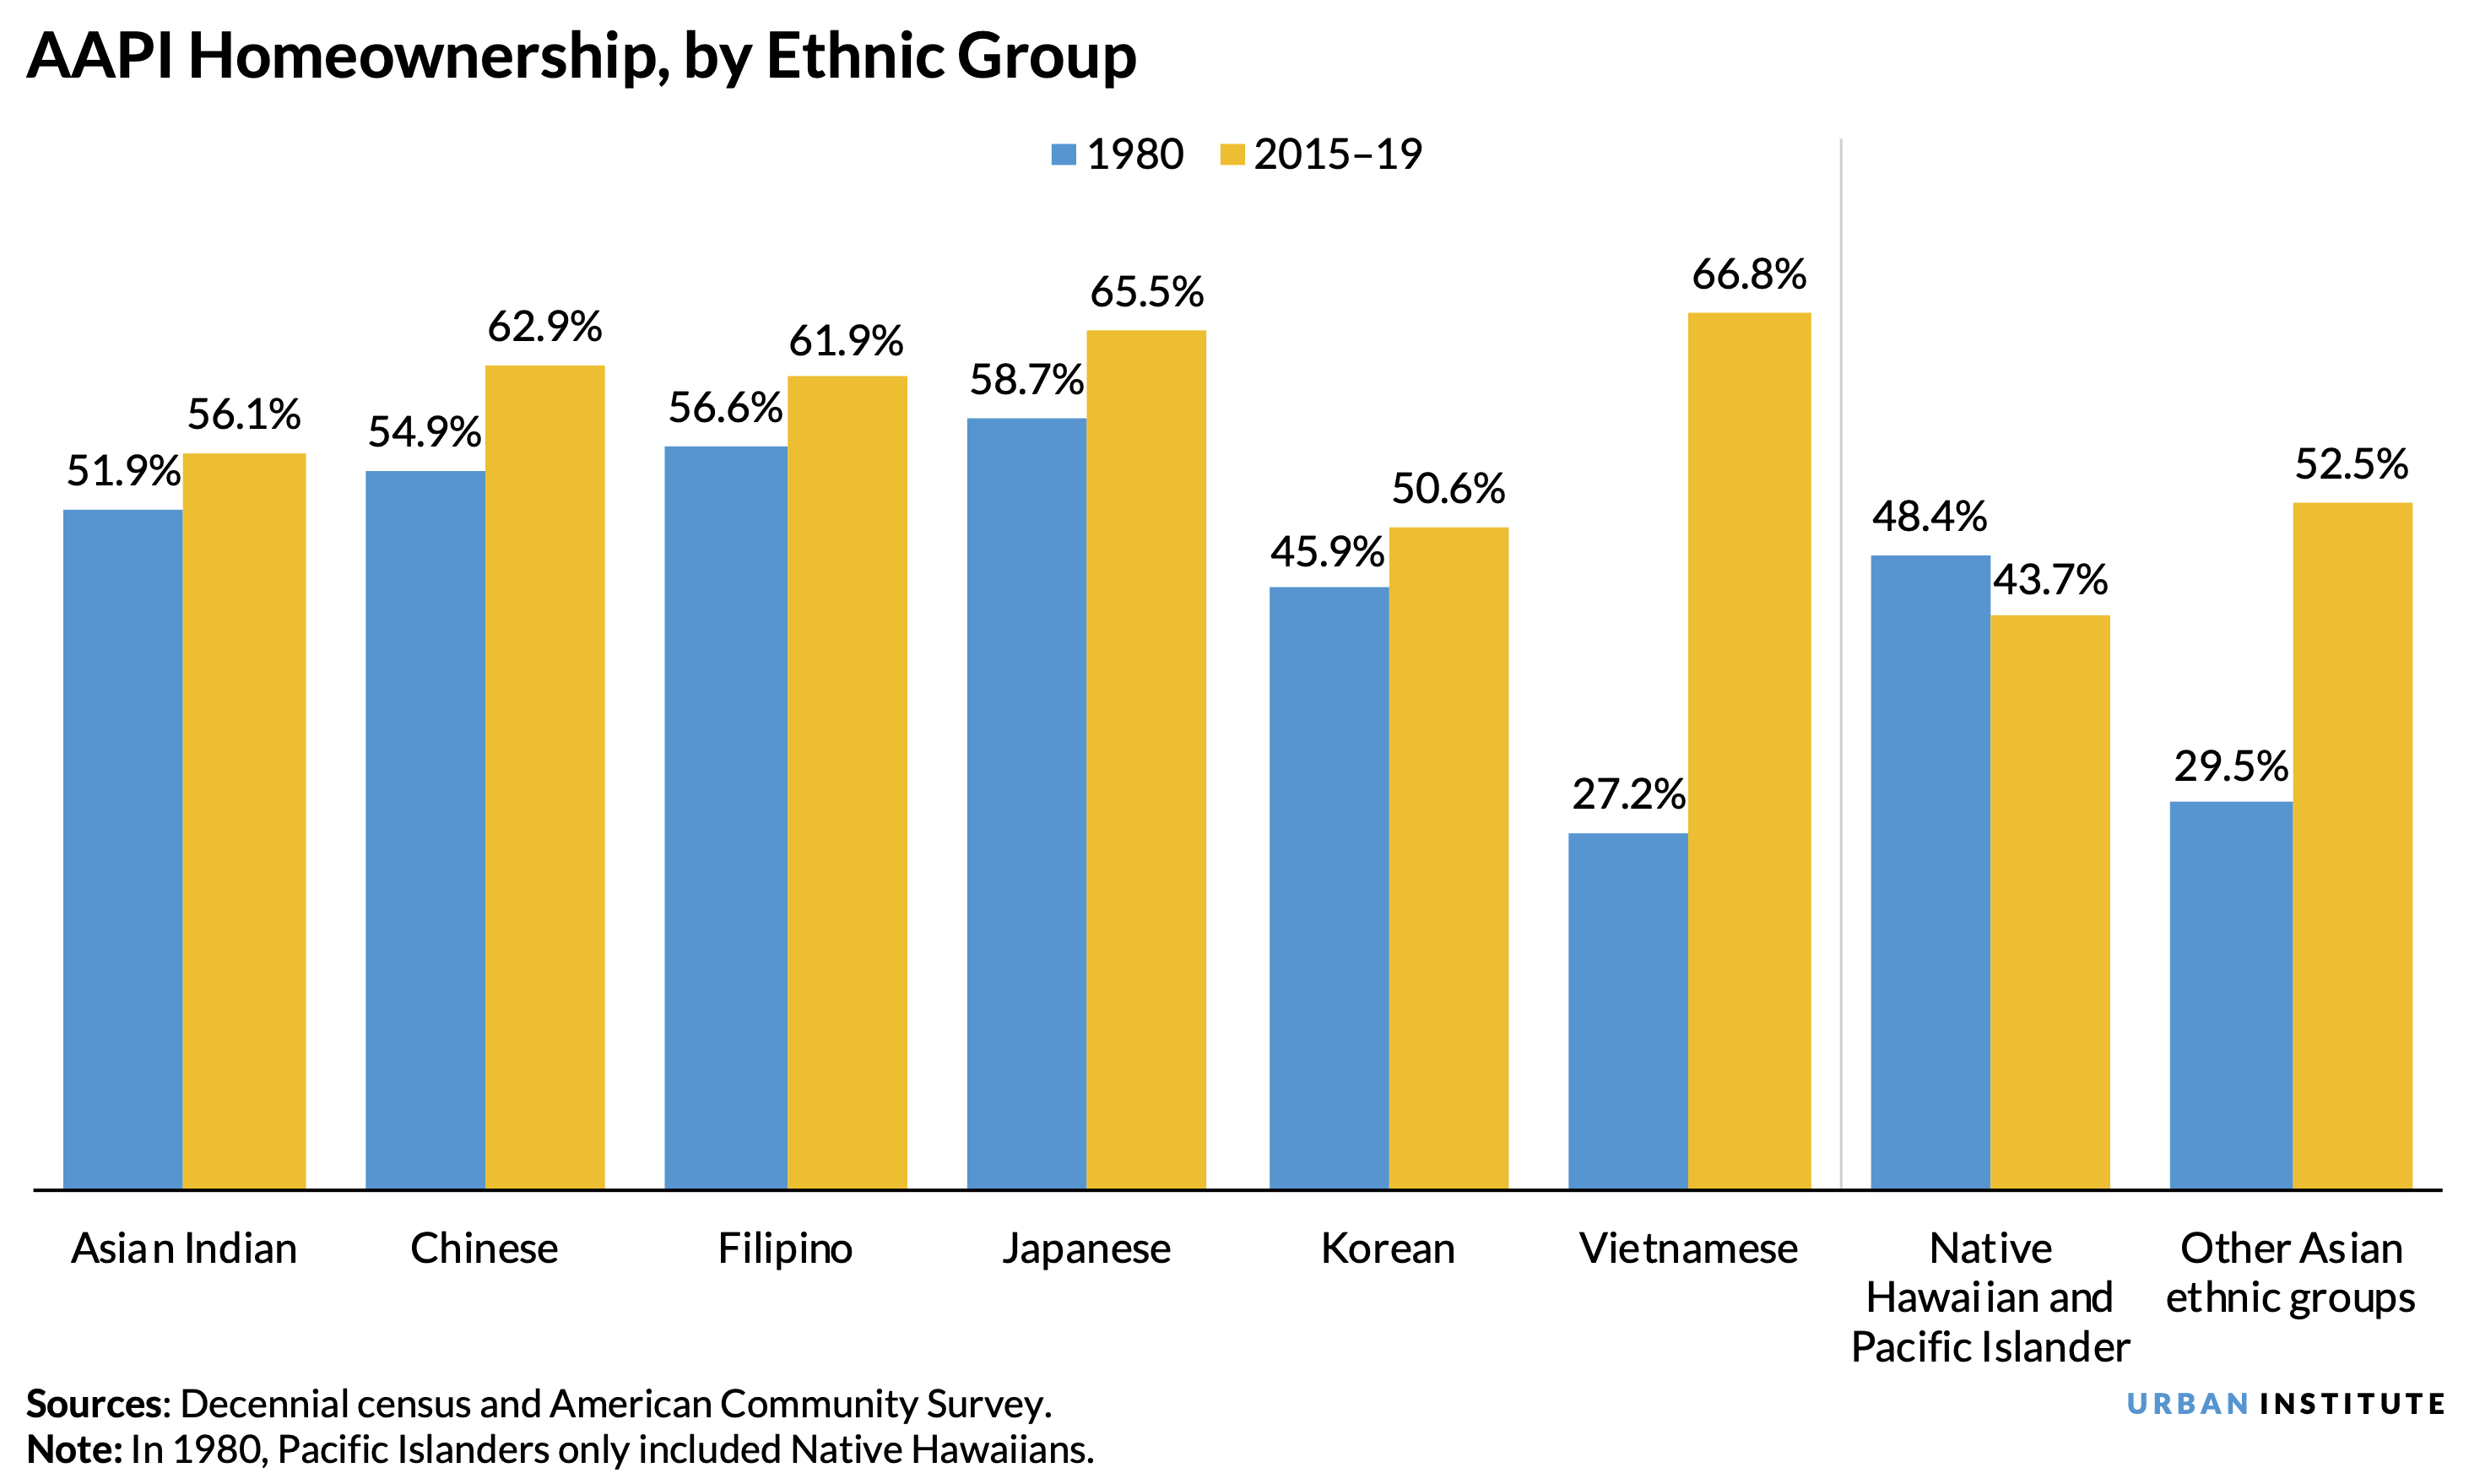 Bar chart showing Asian American and Pacific Islander homeownership in the US by ethnic group, in 1980 compared with 2015-19